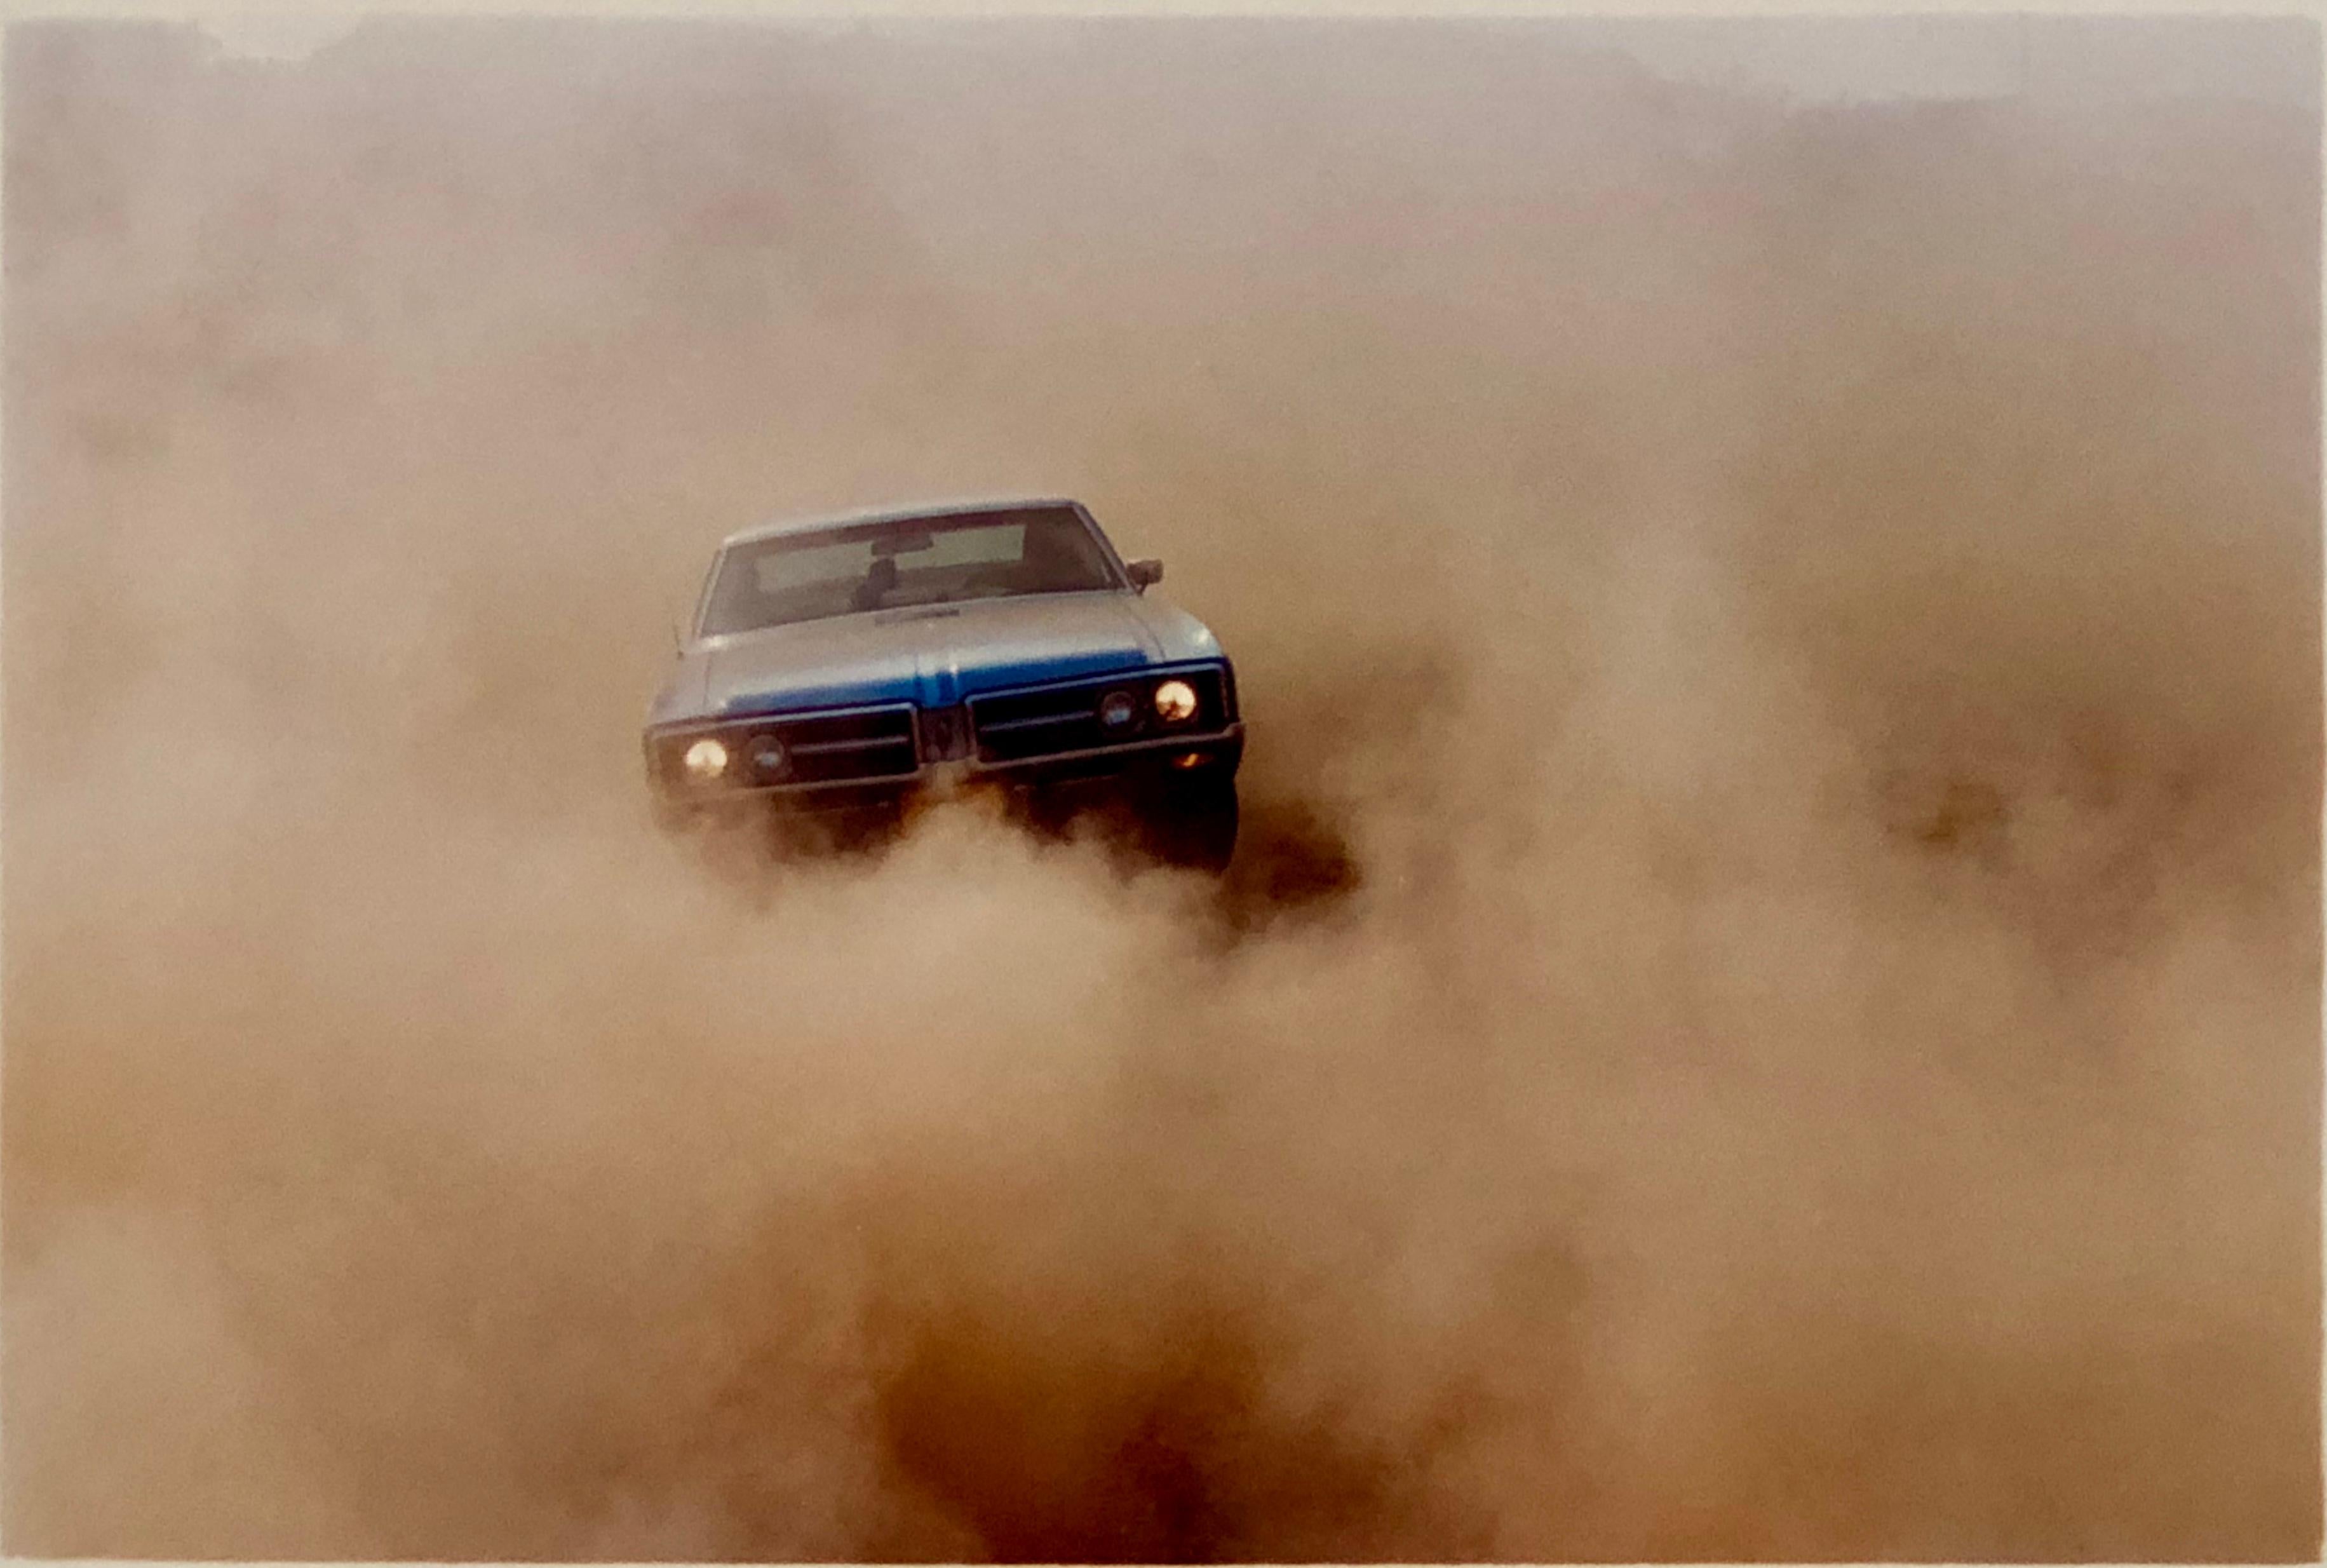 Richard Heeps Print - Buick in the Dust II, Hemsby, Norfolk - Color Photography of a Car